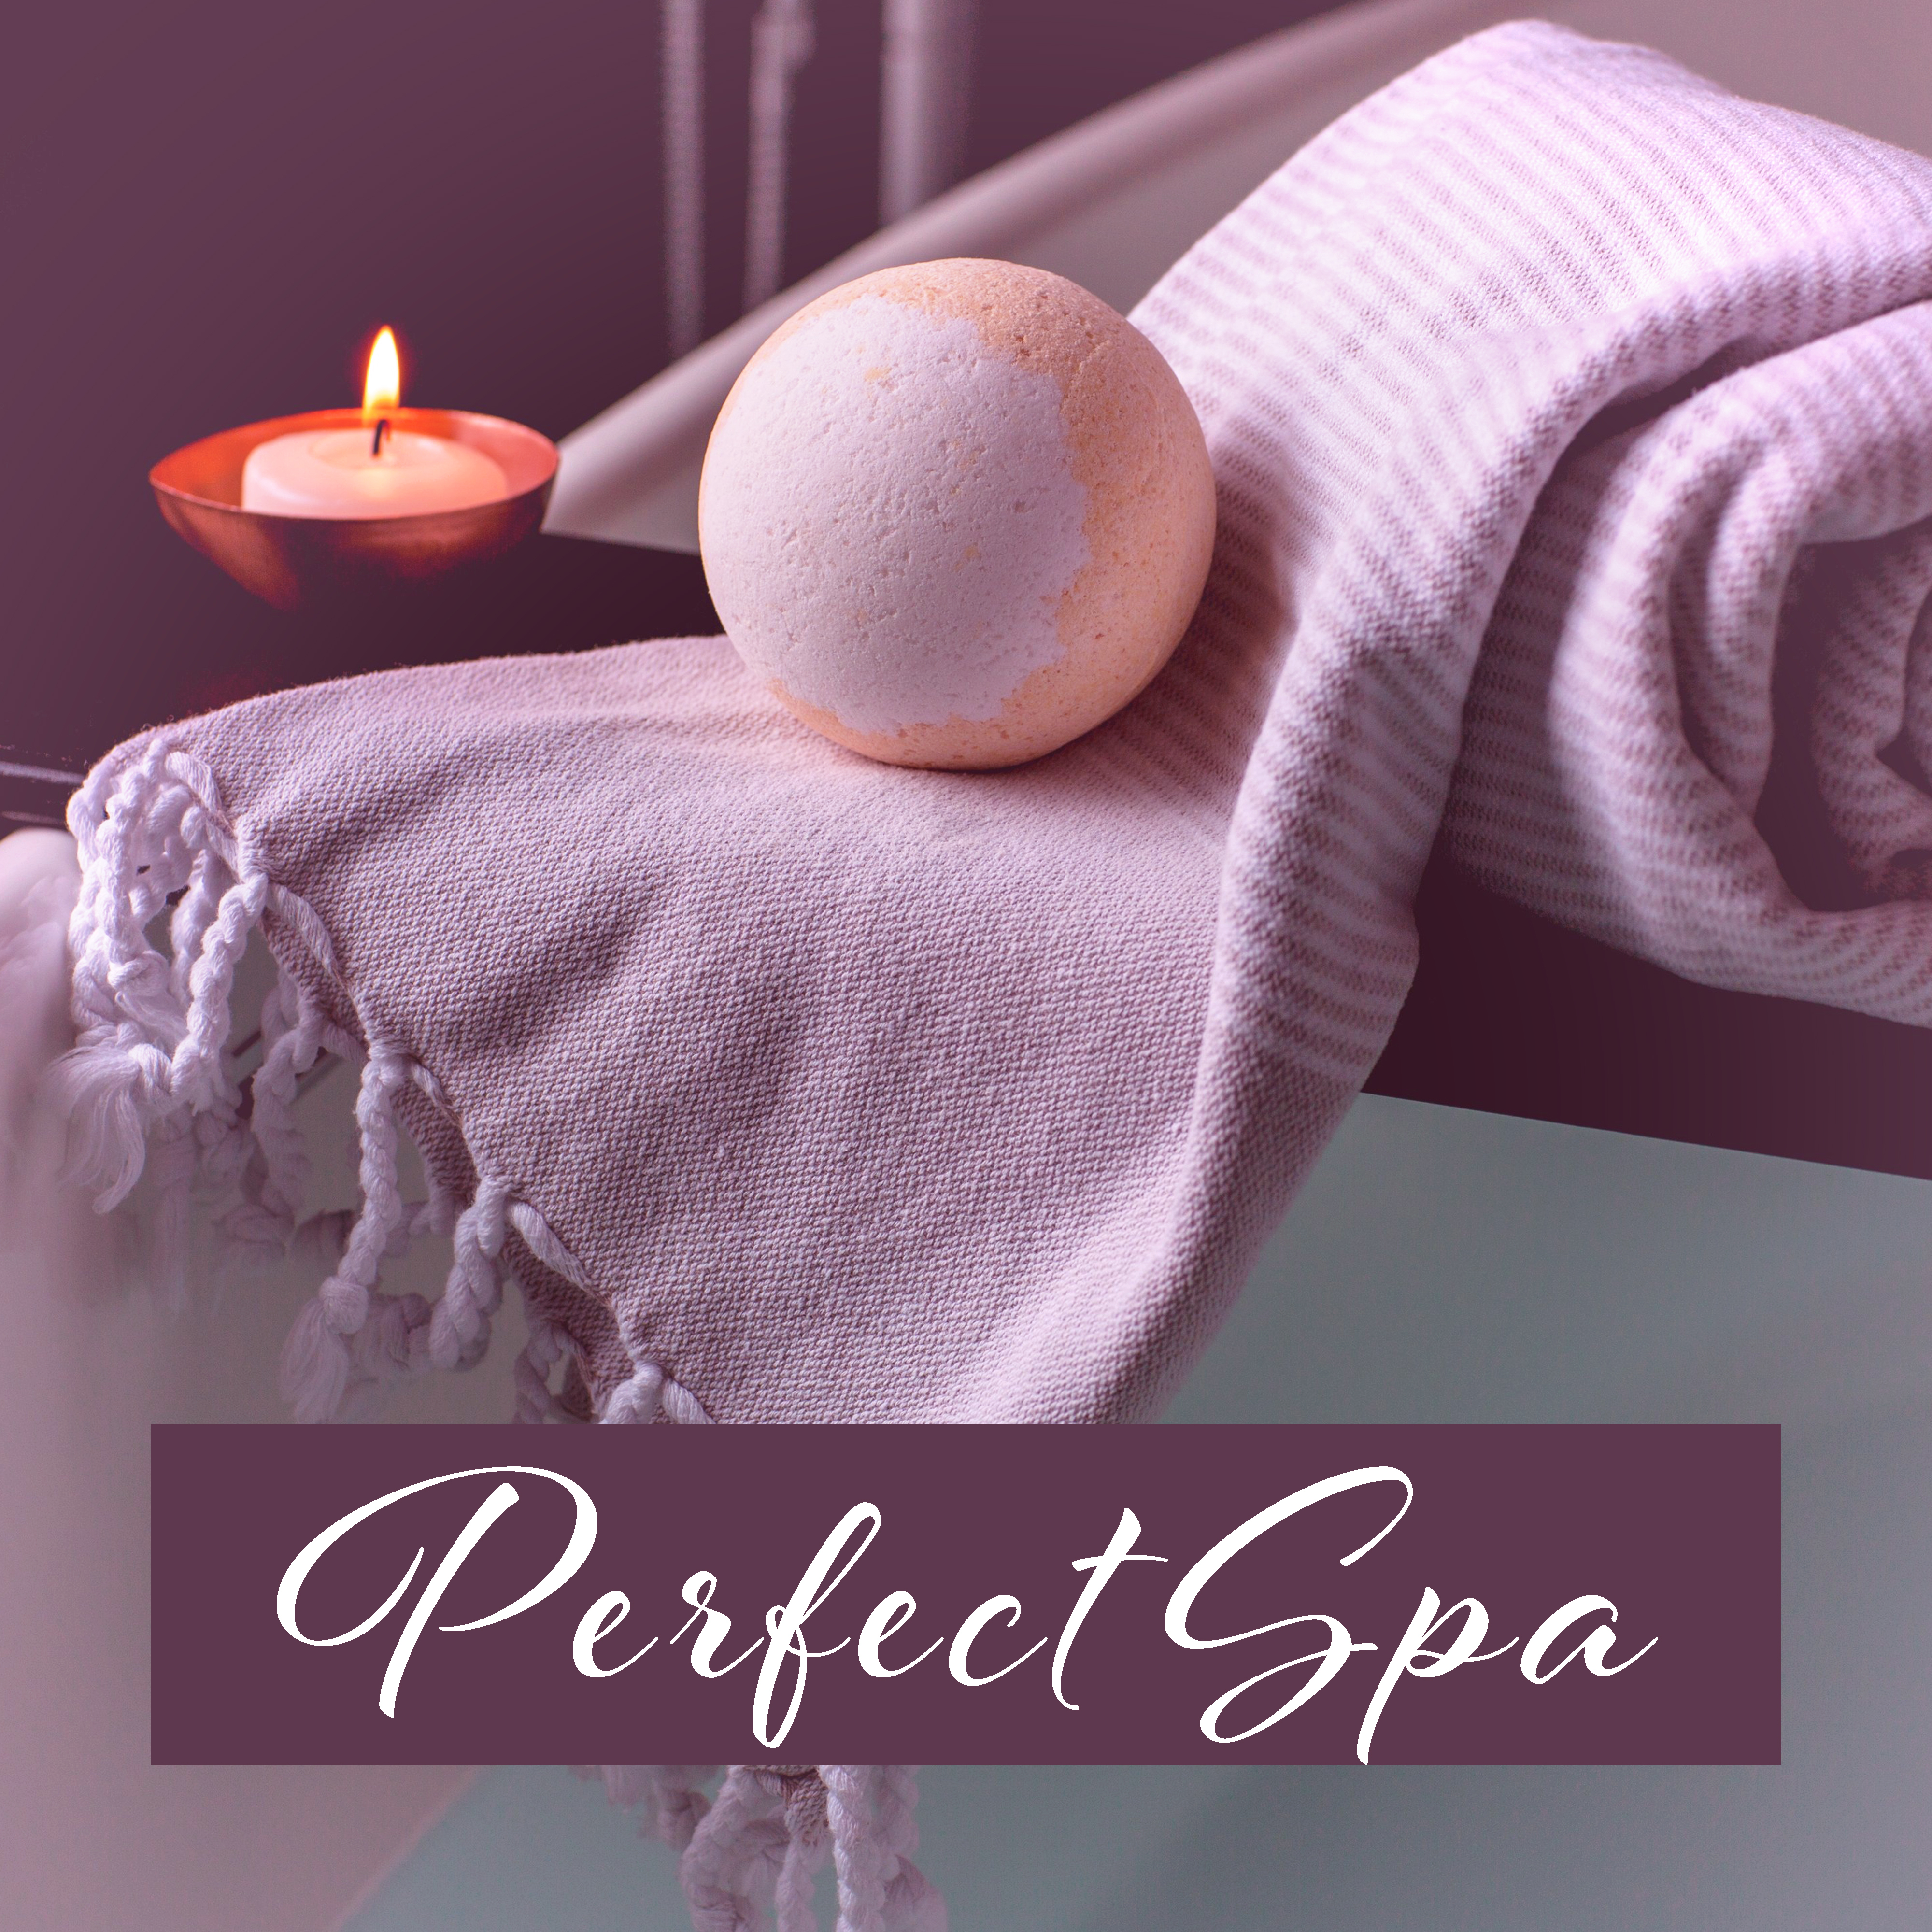 Perfect Spa  Soft Sounds for Relaxation, Wellness, Calm Down, Relaxing Music Therapy, Inner Zen